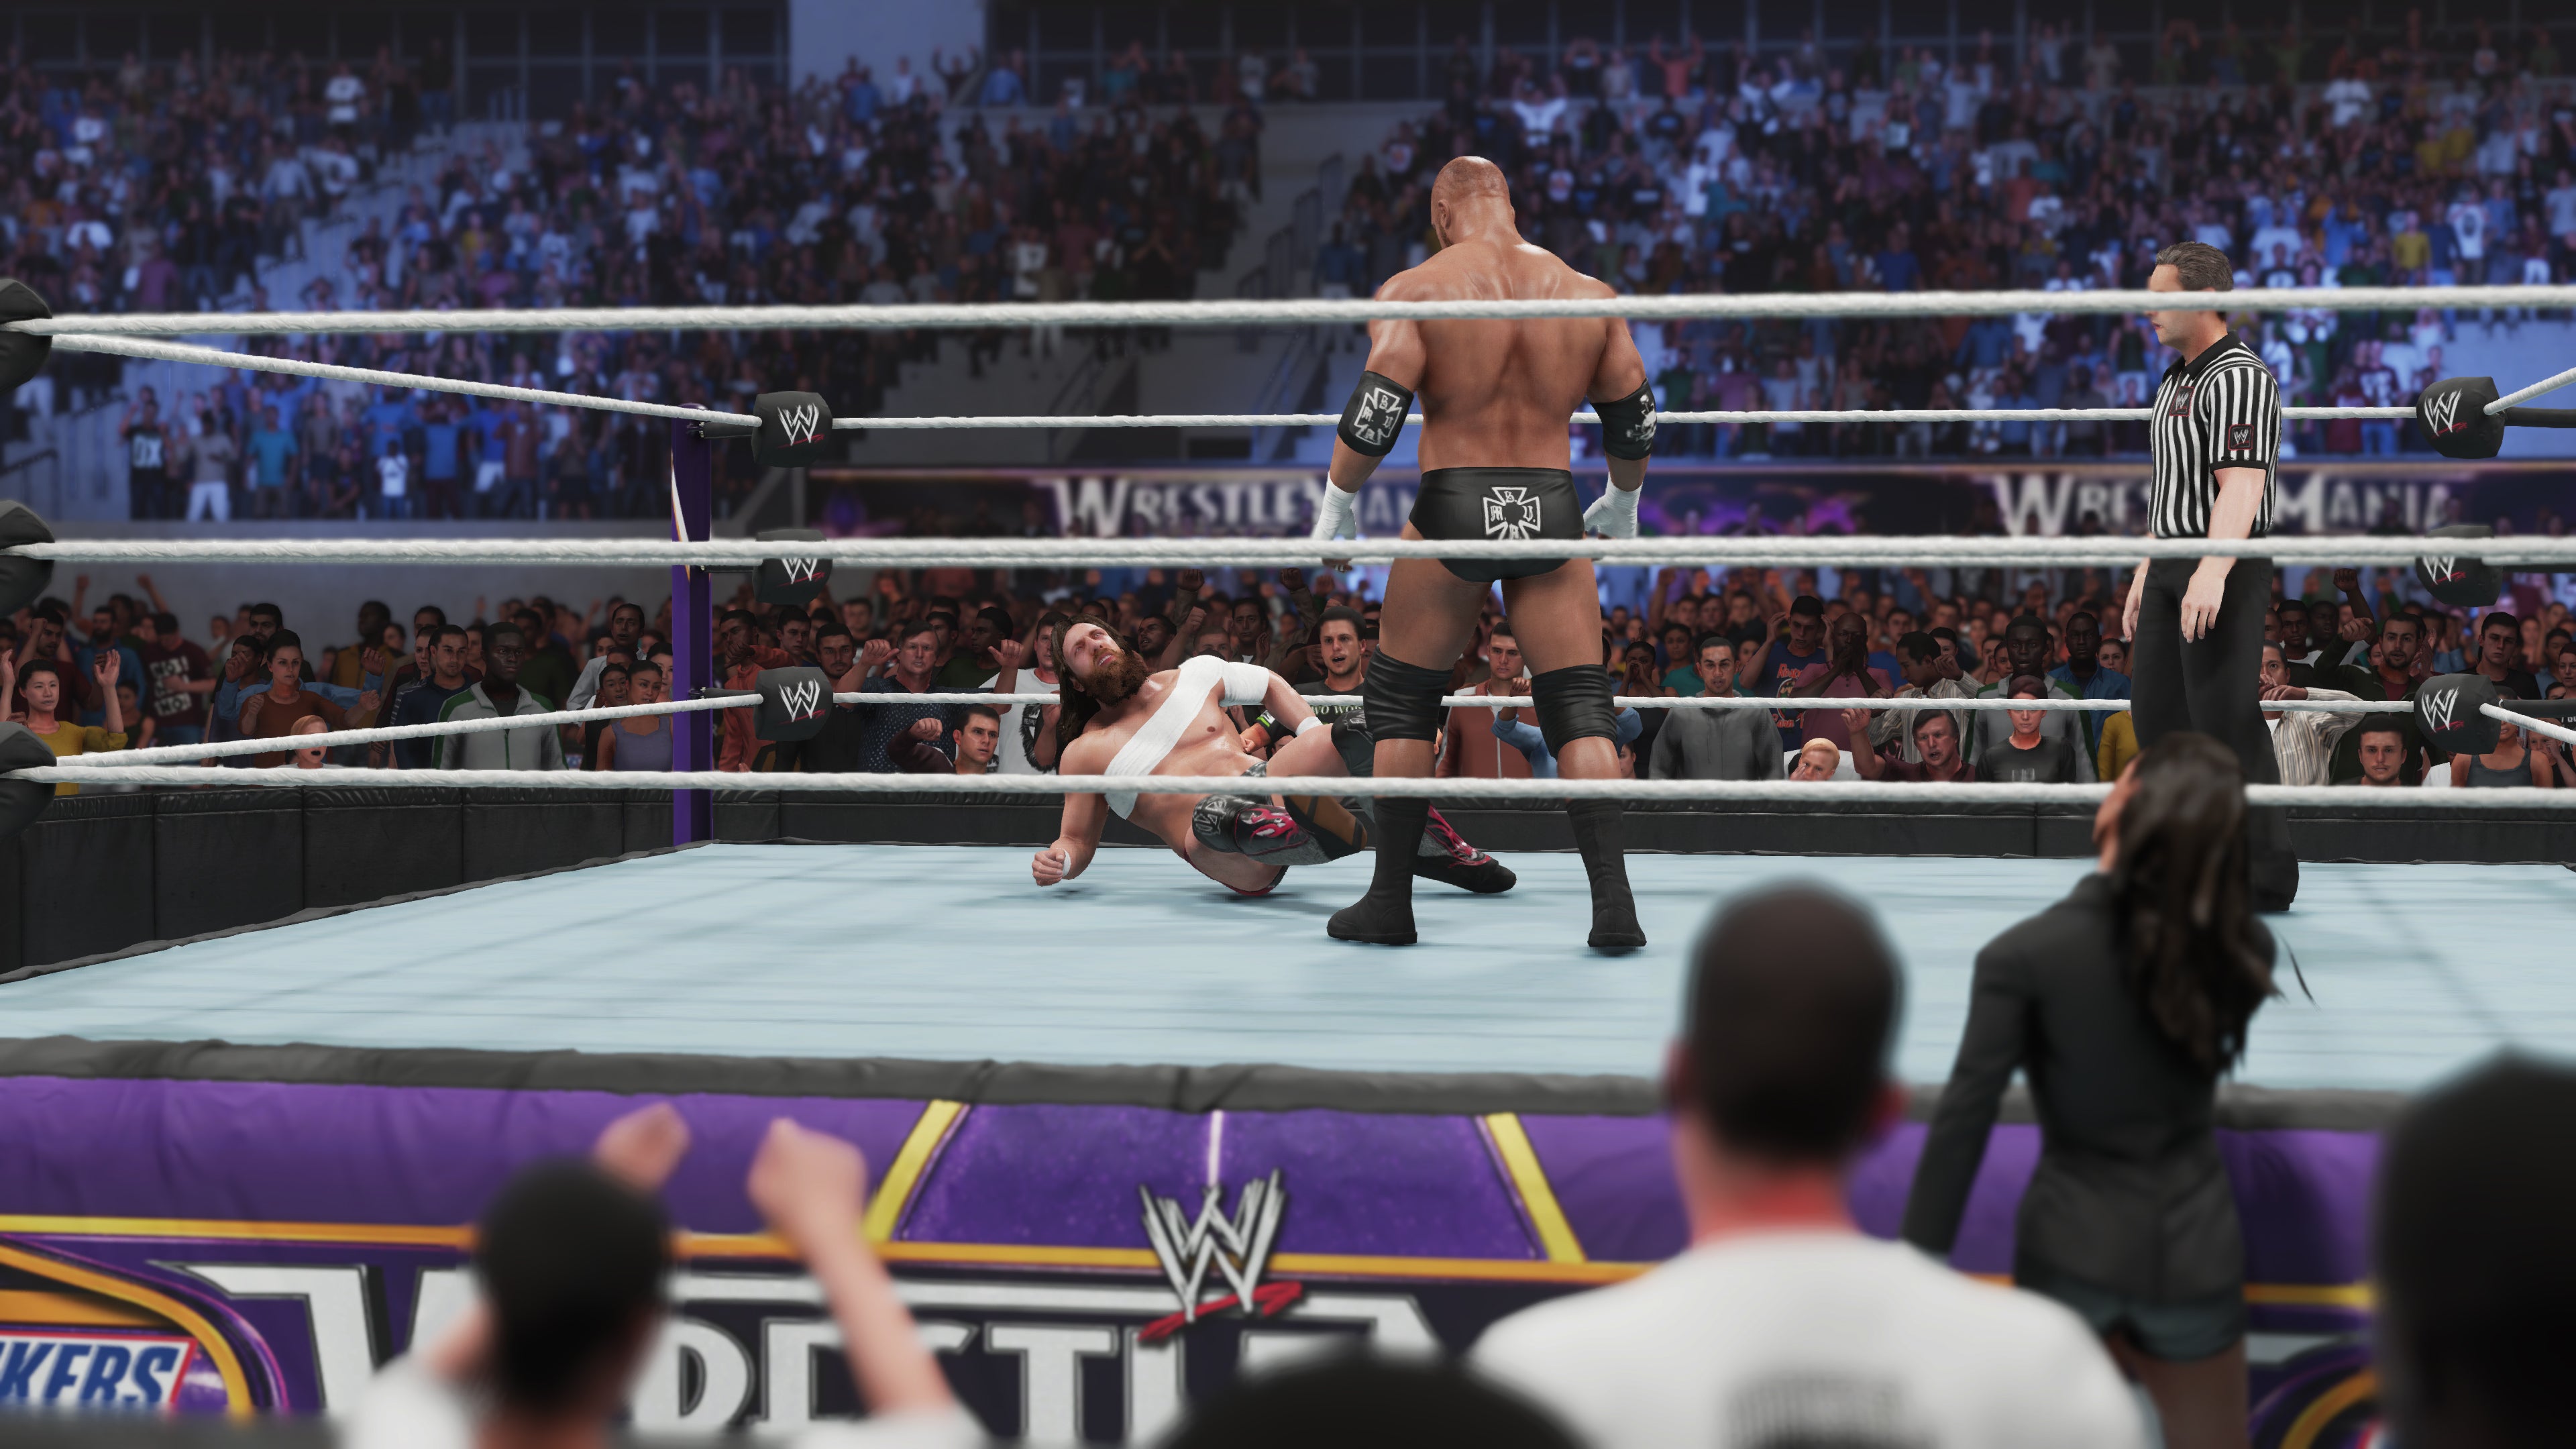 Image for WWE 2K19 leaps off the top turnbuckle